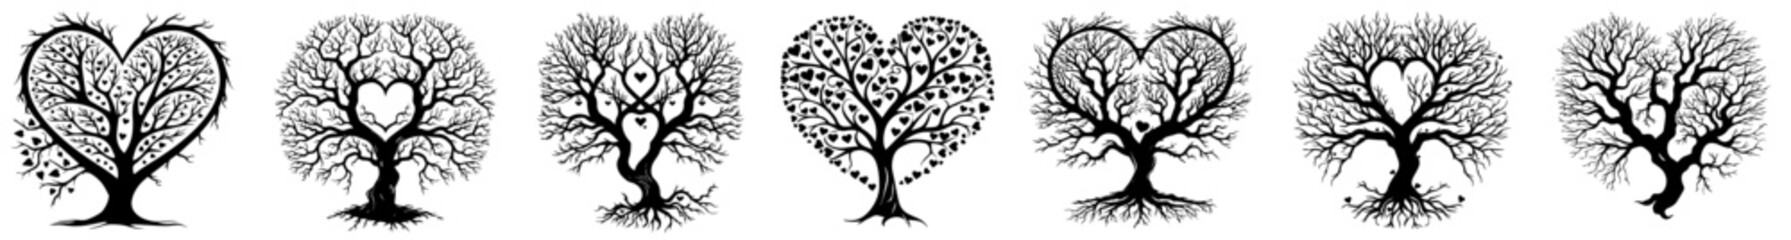 heart-shaped trees silhouette shape in black vector illustration laser cutting engraving